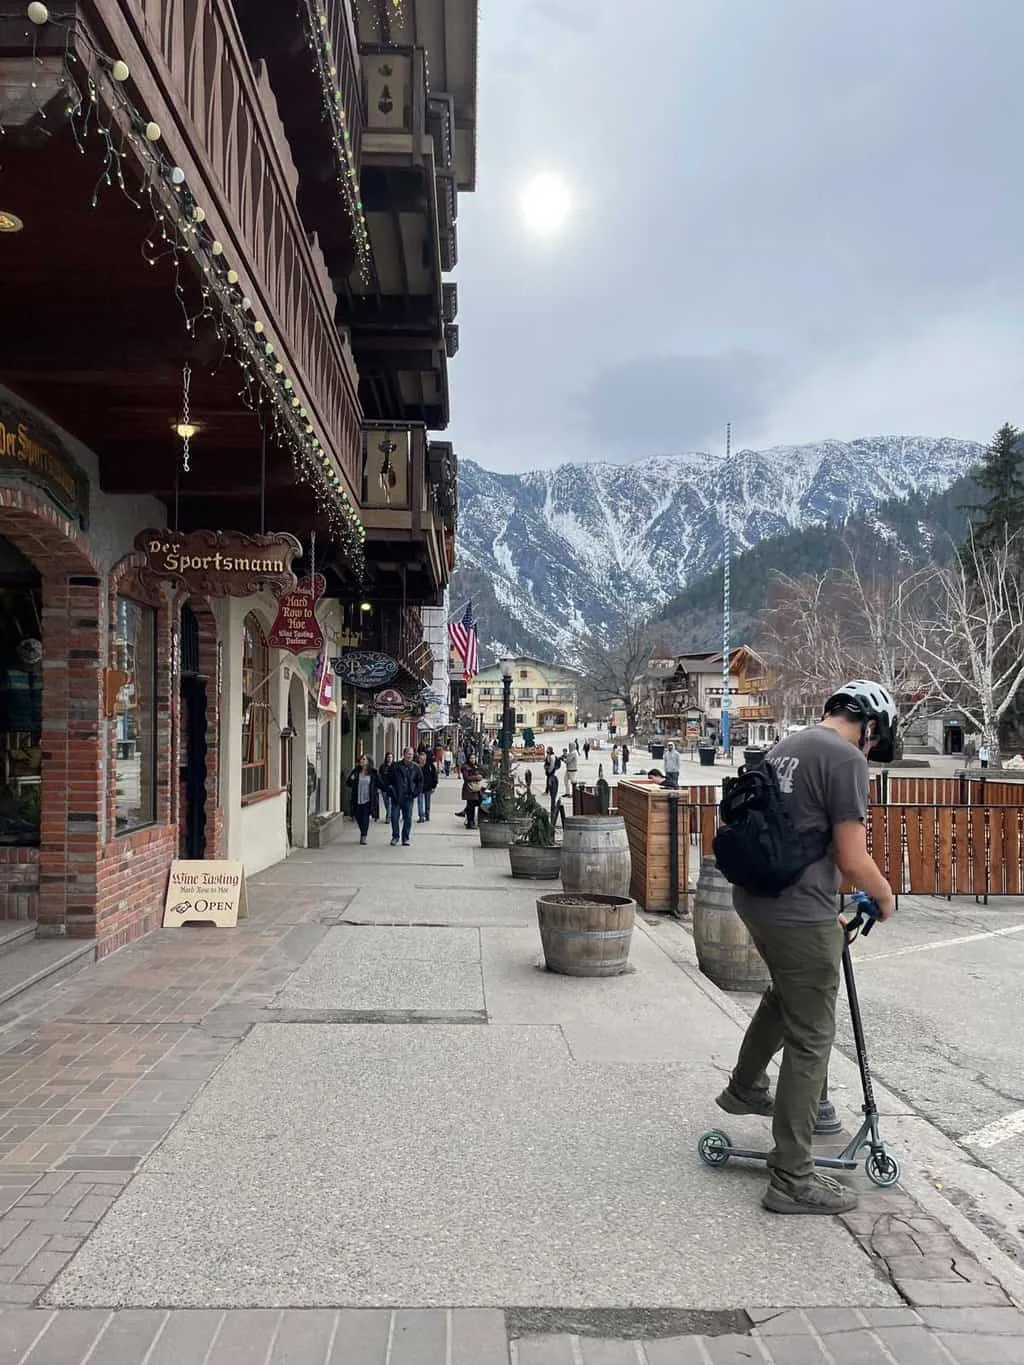 A boy riding a scooter through the scenic town of Leavenworth.